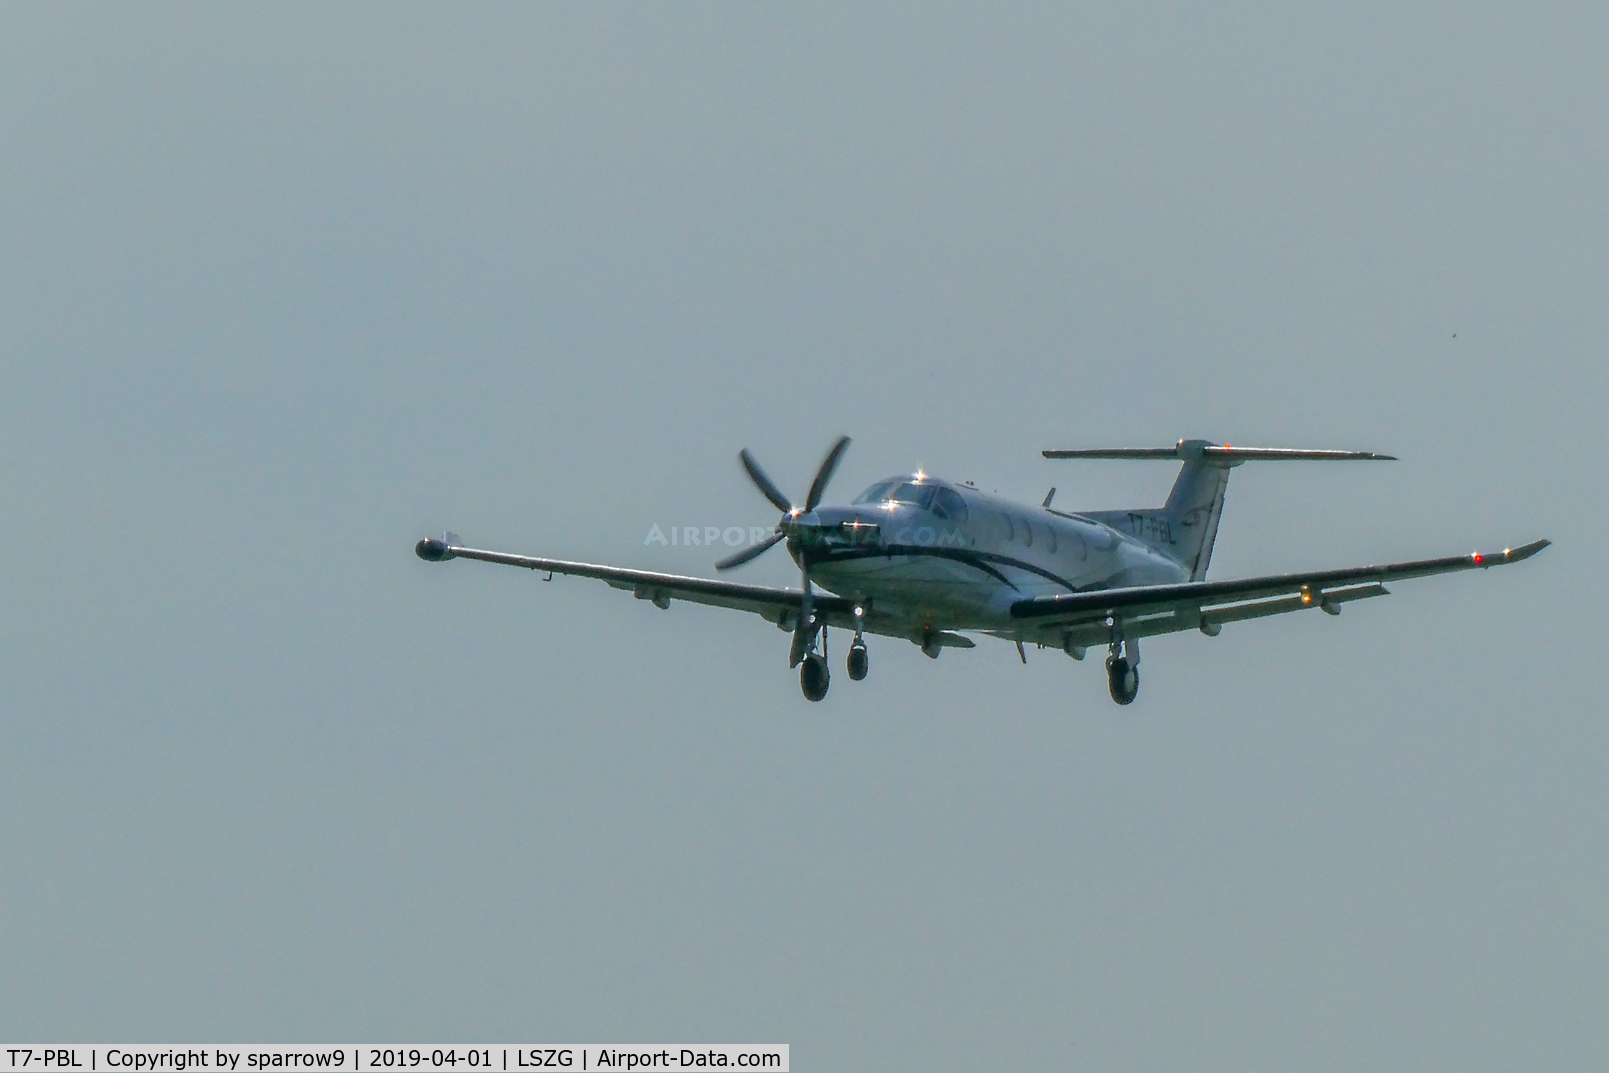 T7-PBL, 2010 Pilatus PC-12/47E C/N 1205, On approach to Grenchens rwy 06